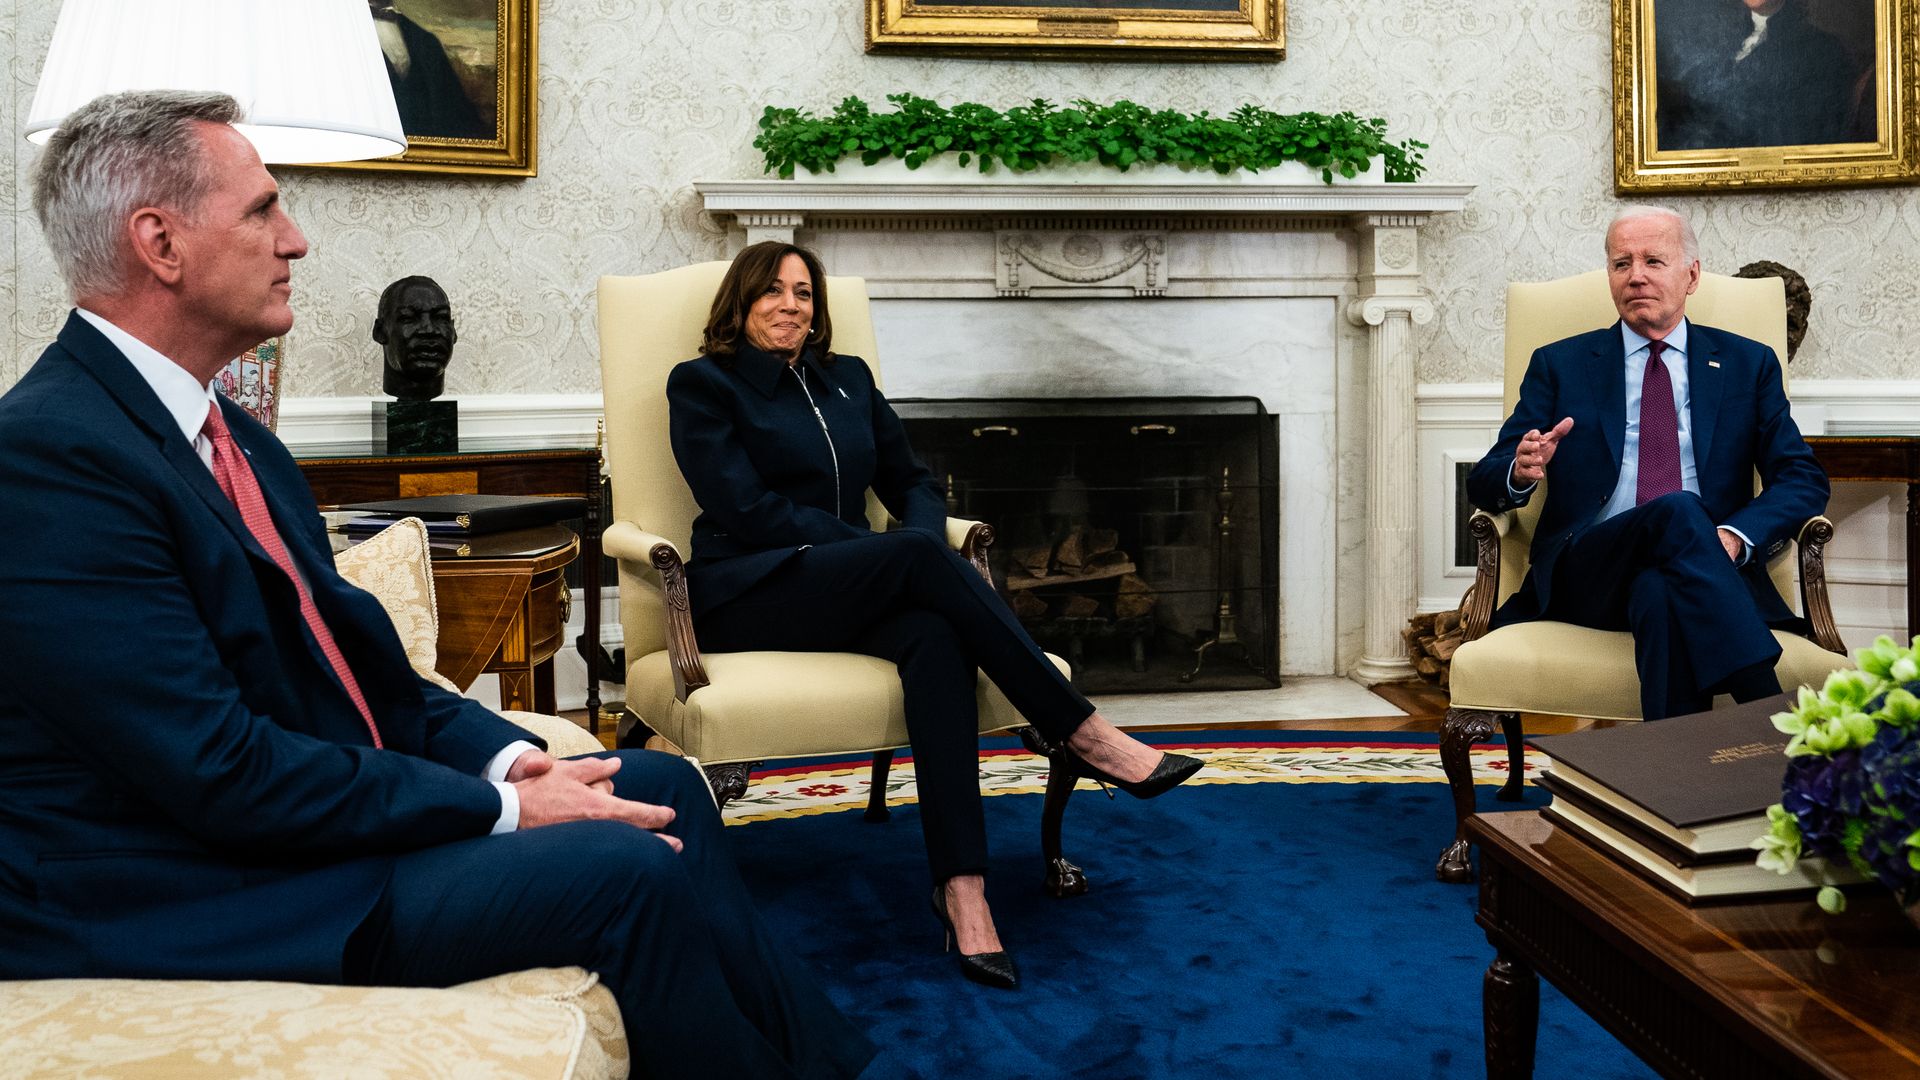 US President Joe Biden and Vice President Kamala Harris meet with House Speaker Kevin McCarthy in the Oval Office of the White House on Tuesday, May 16, 2023.